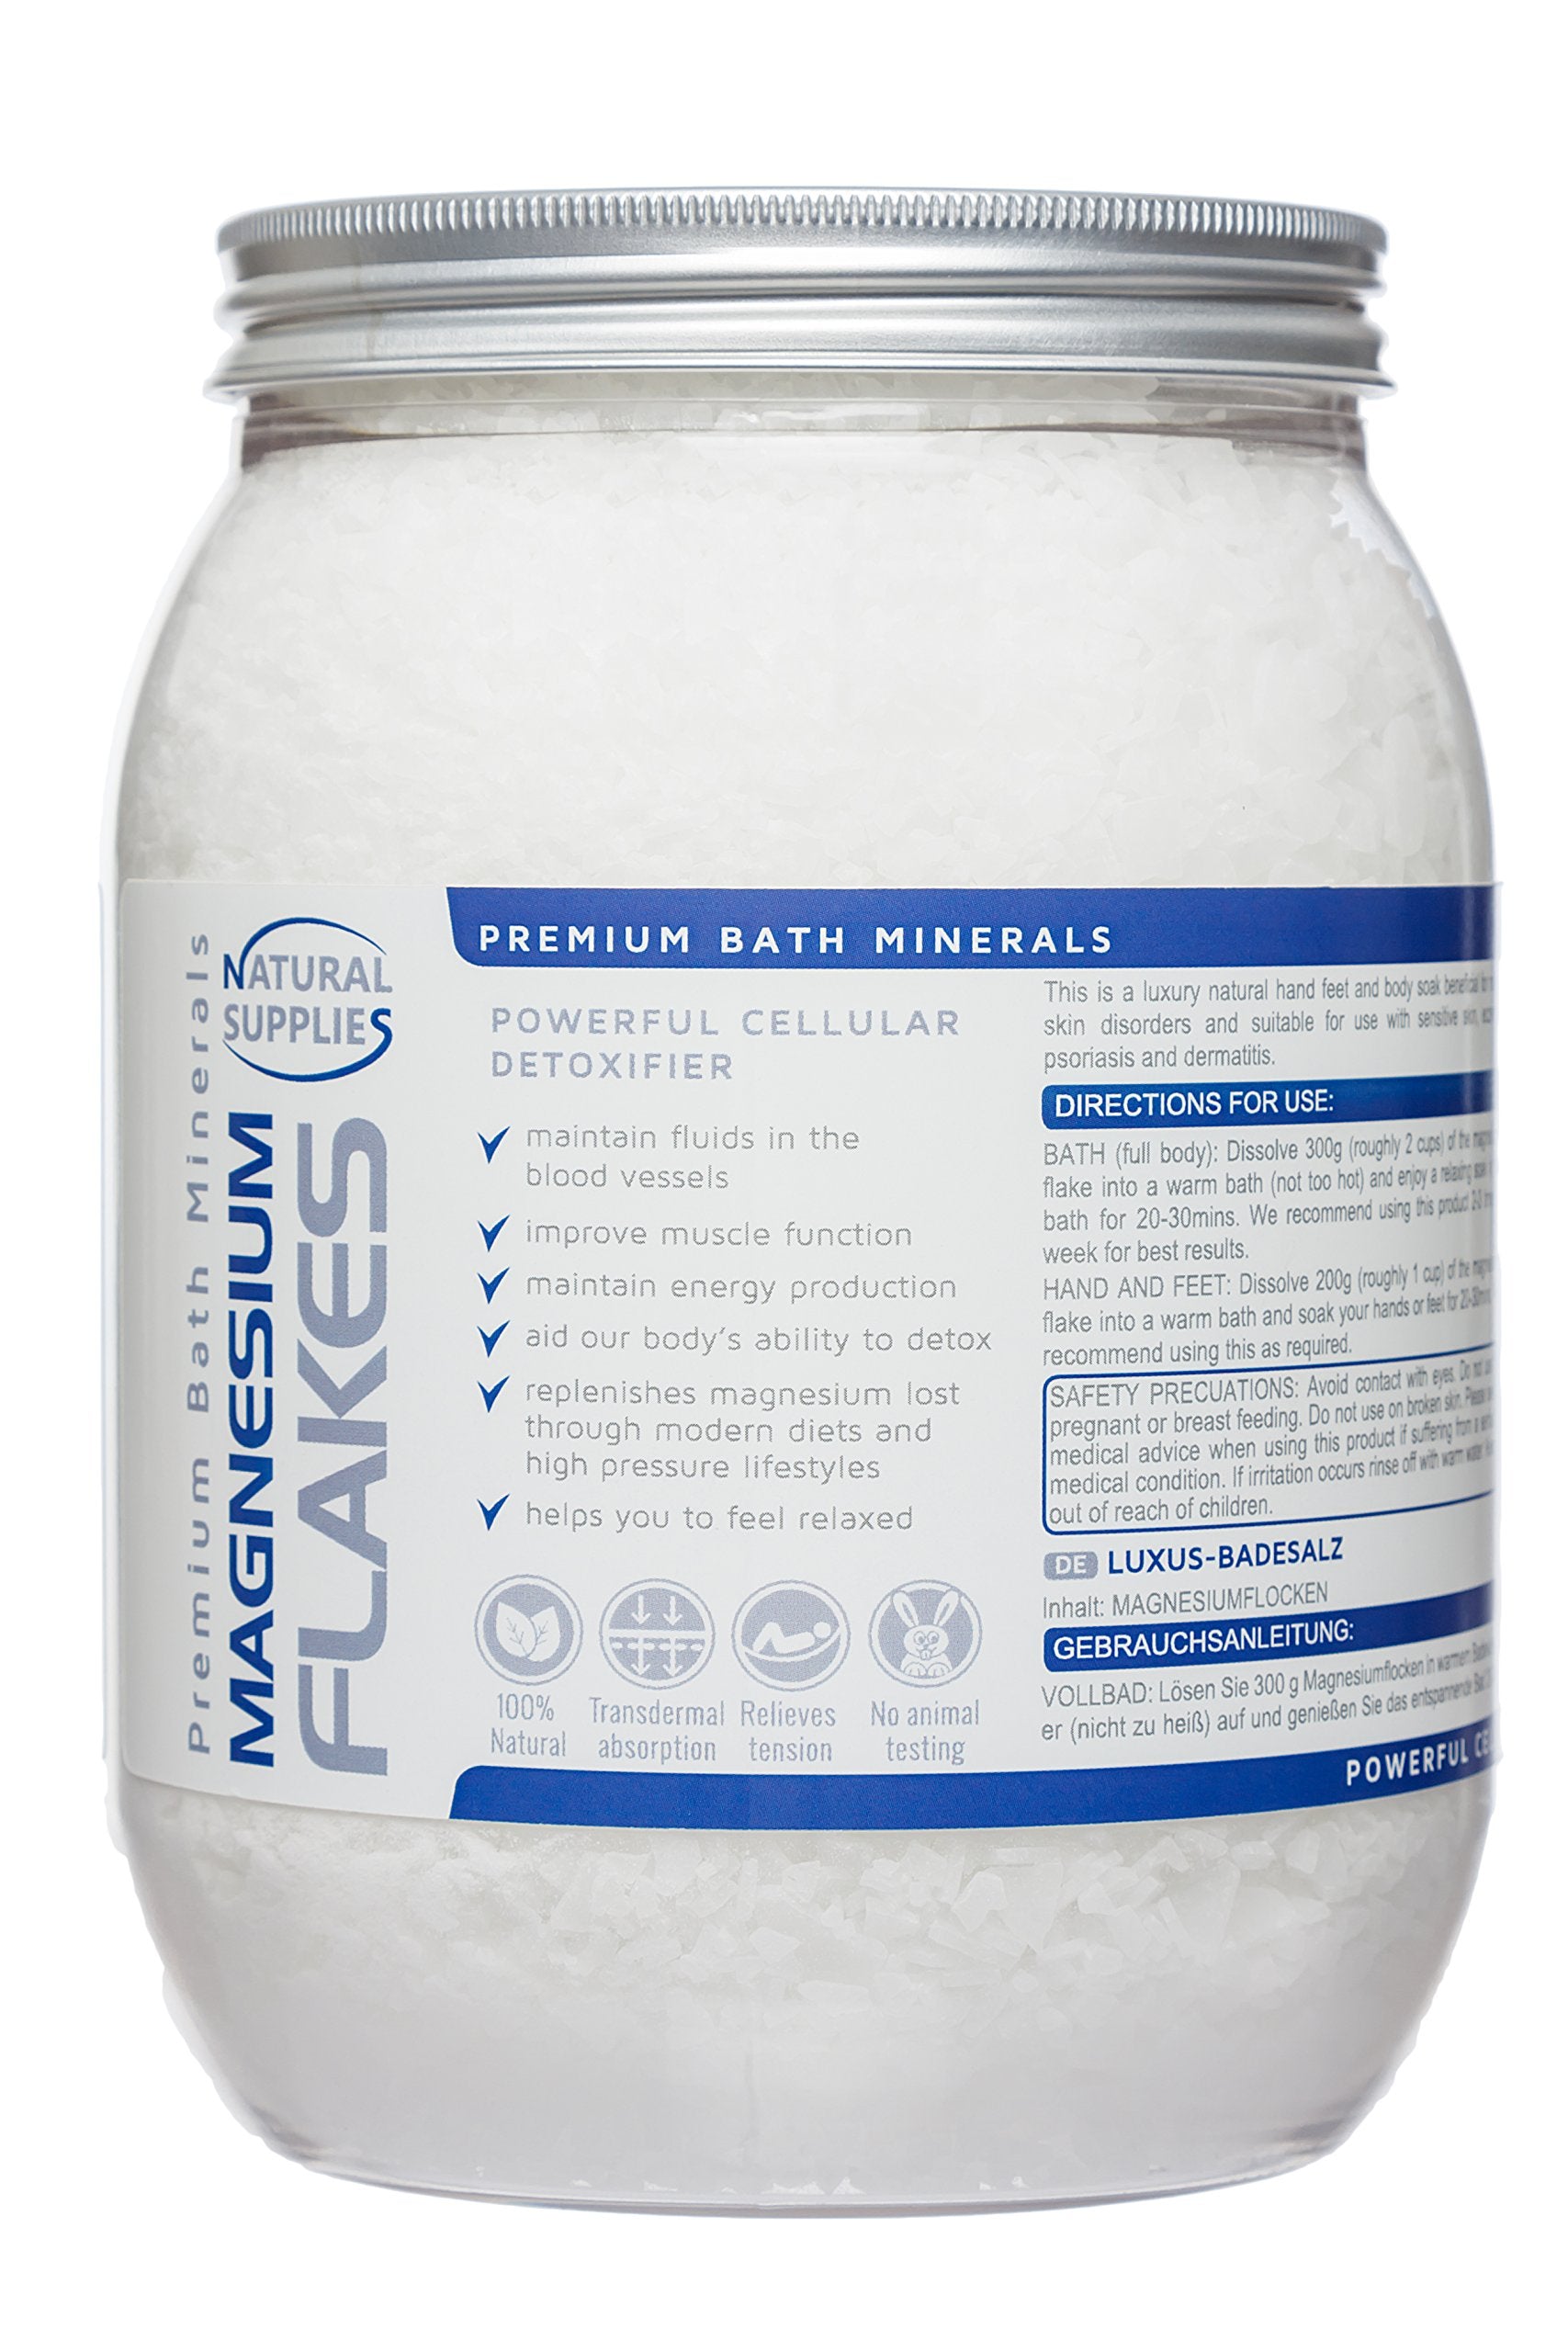 Magnesium Flakes 1.2kg, Premium Bath Salts Relaxing Therapy - (Magnesium Chloride Hexahydrate) - Resealable